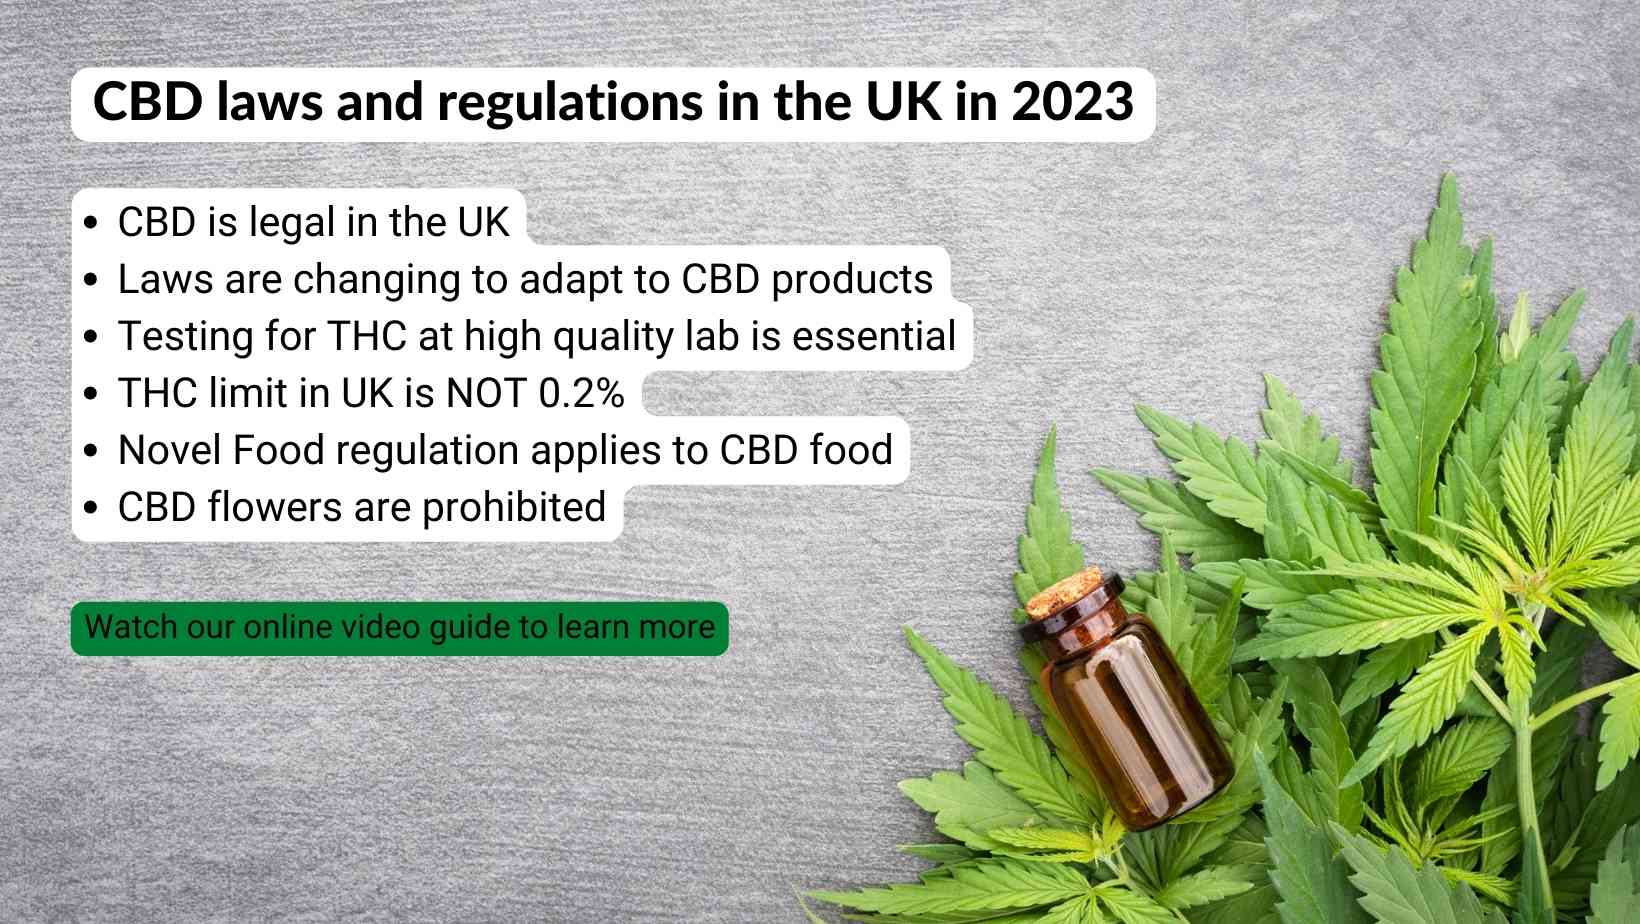 Key cbd laws and regulations in the UK